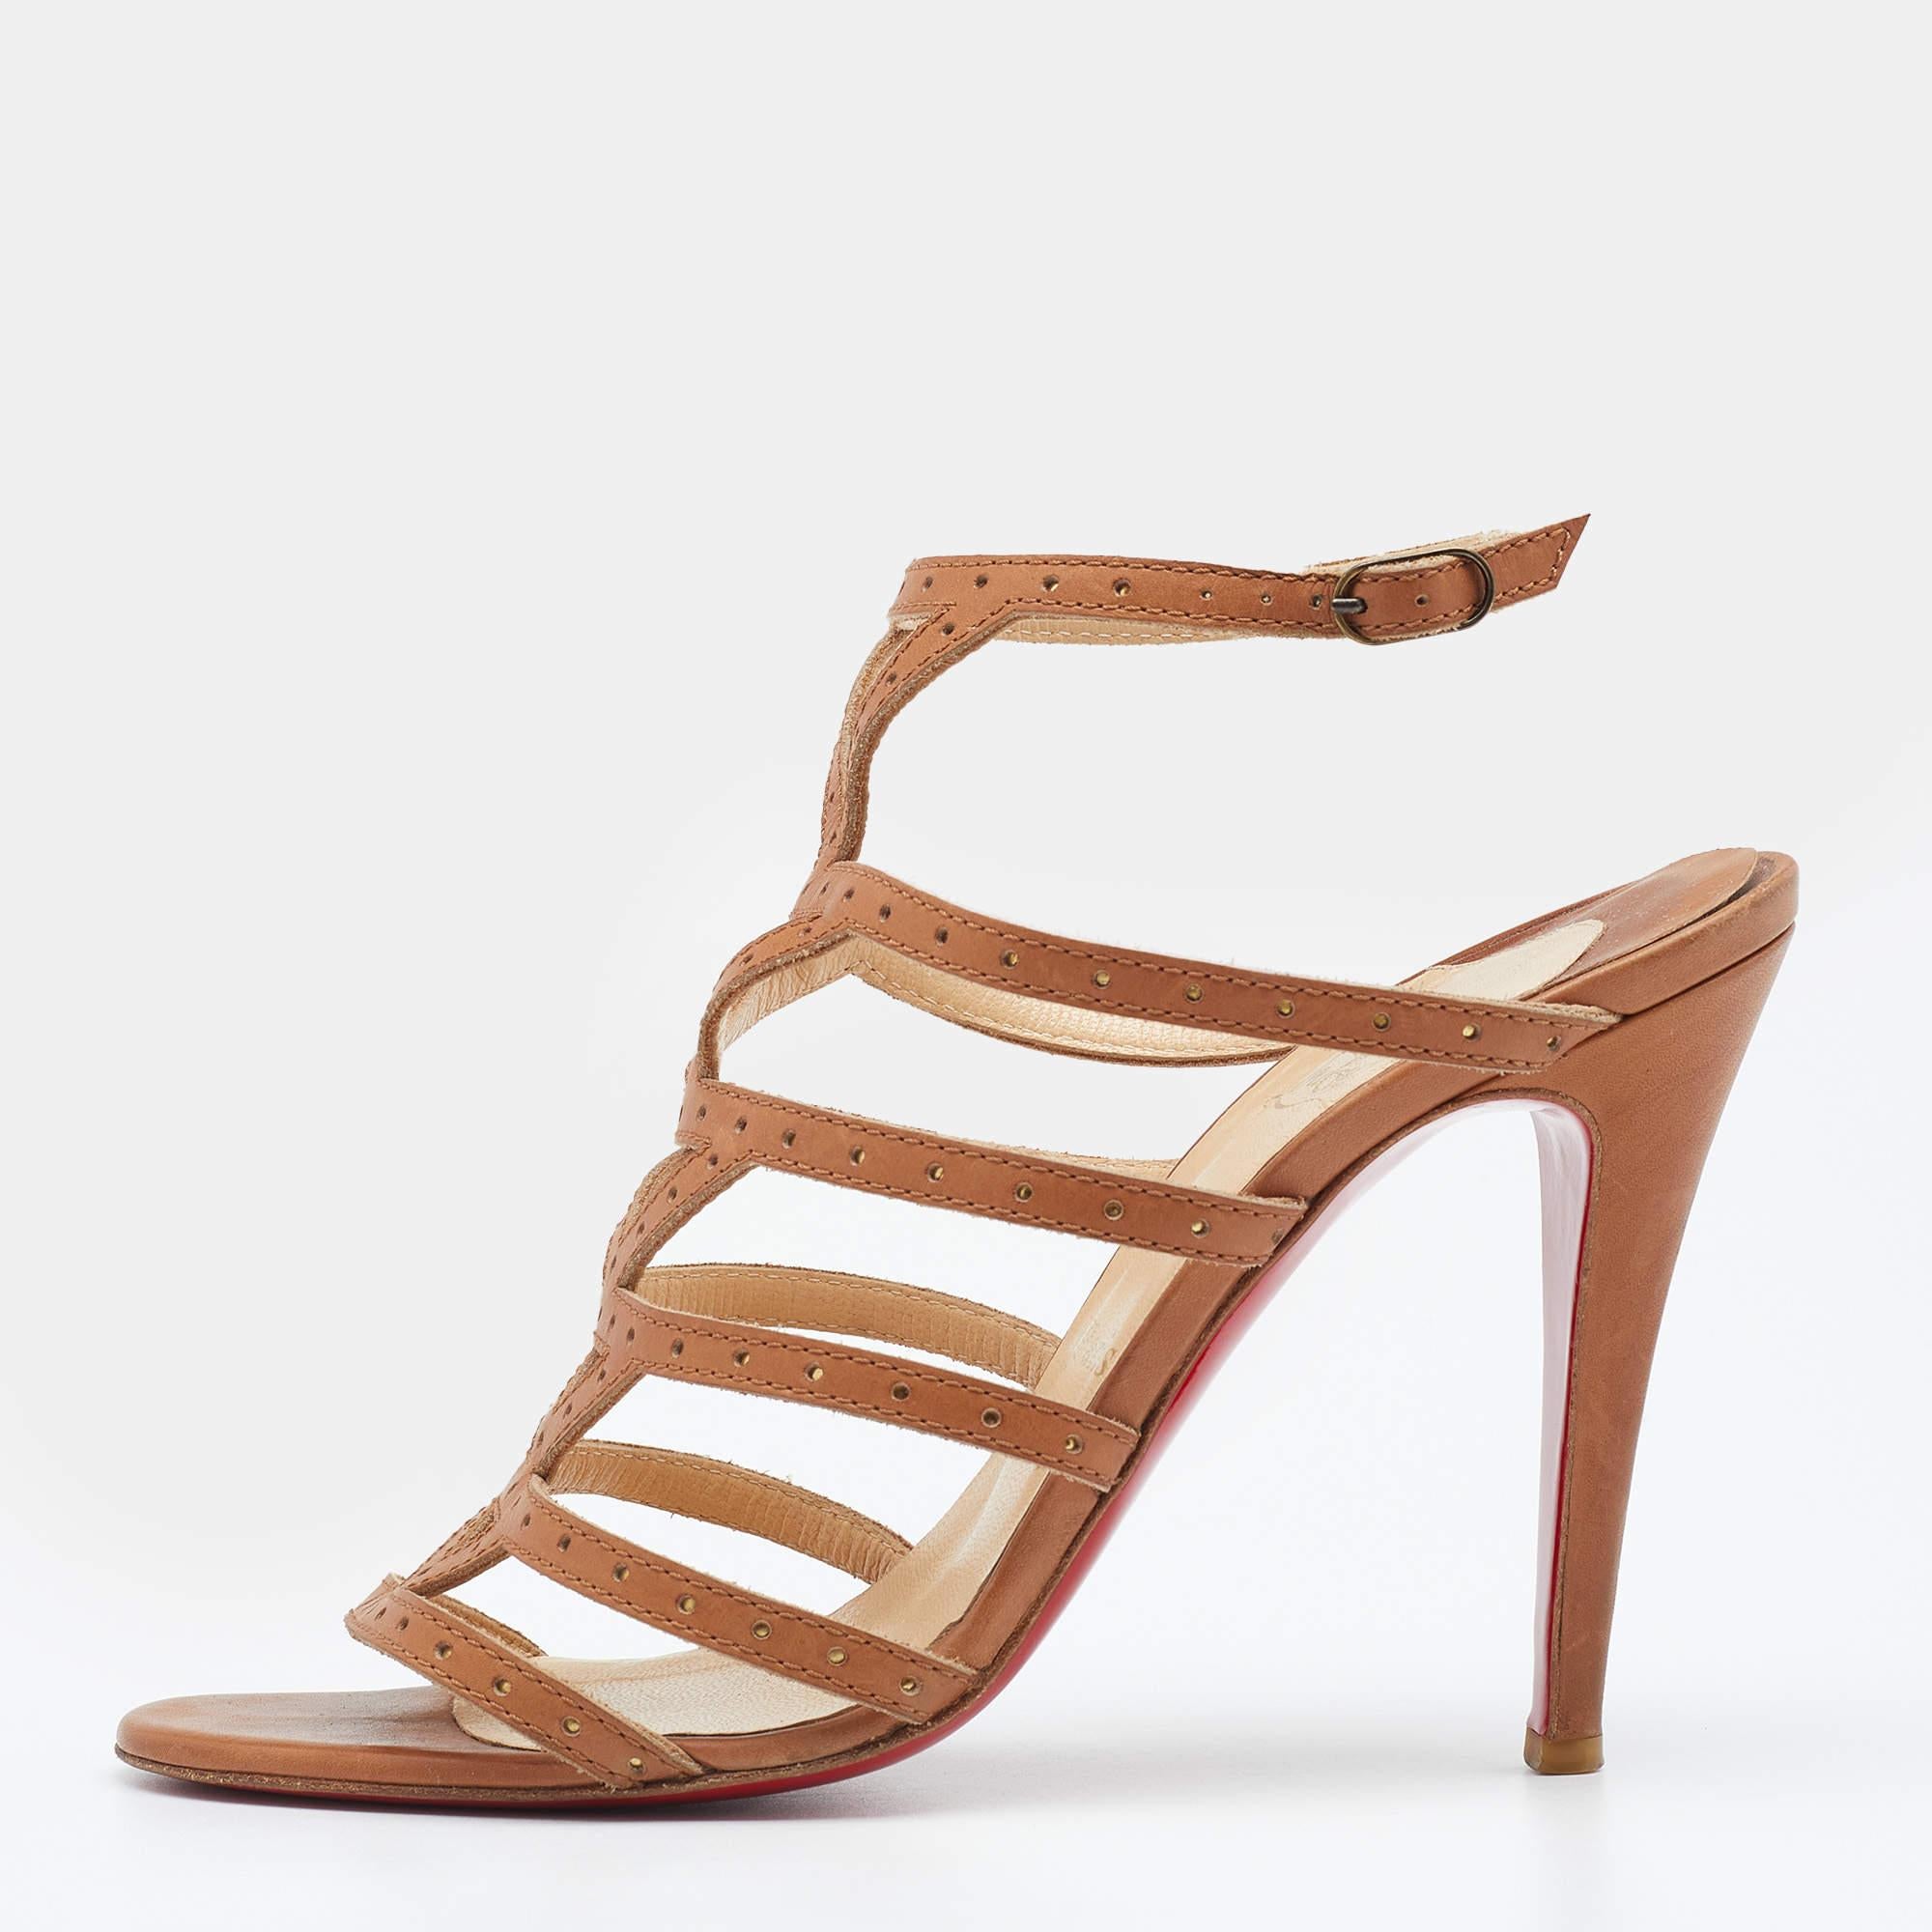 Frame your feet fashionably with these Christian Louboutin sandals. Crafted from beige leather, they feature a strappy upper, an ankle buckle closure, and 12cm heels.

